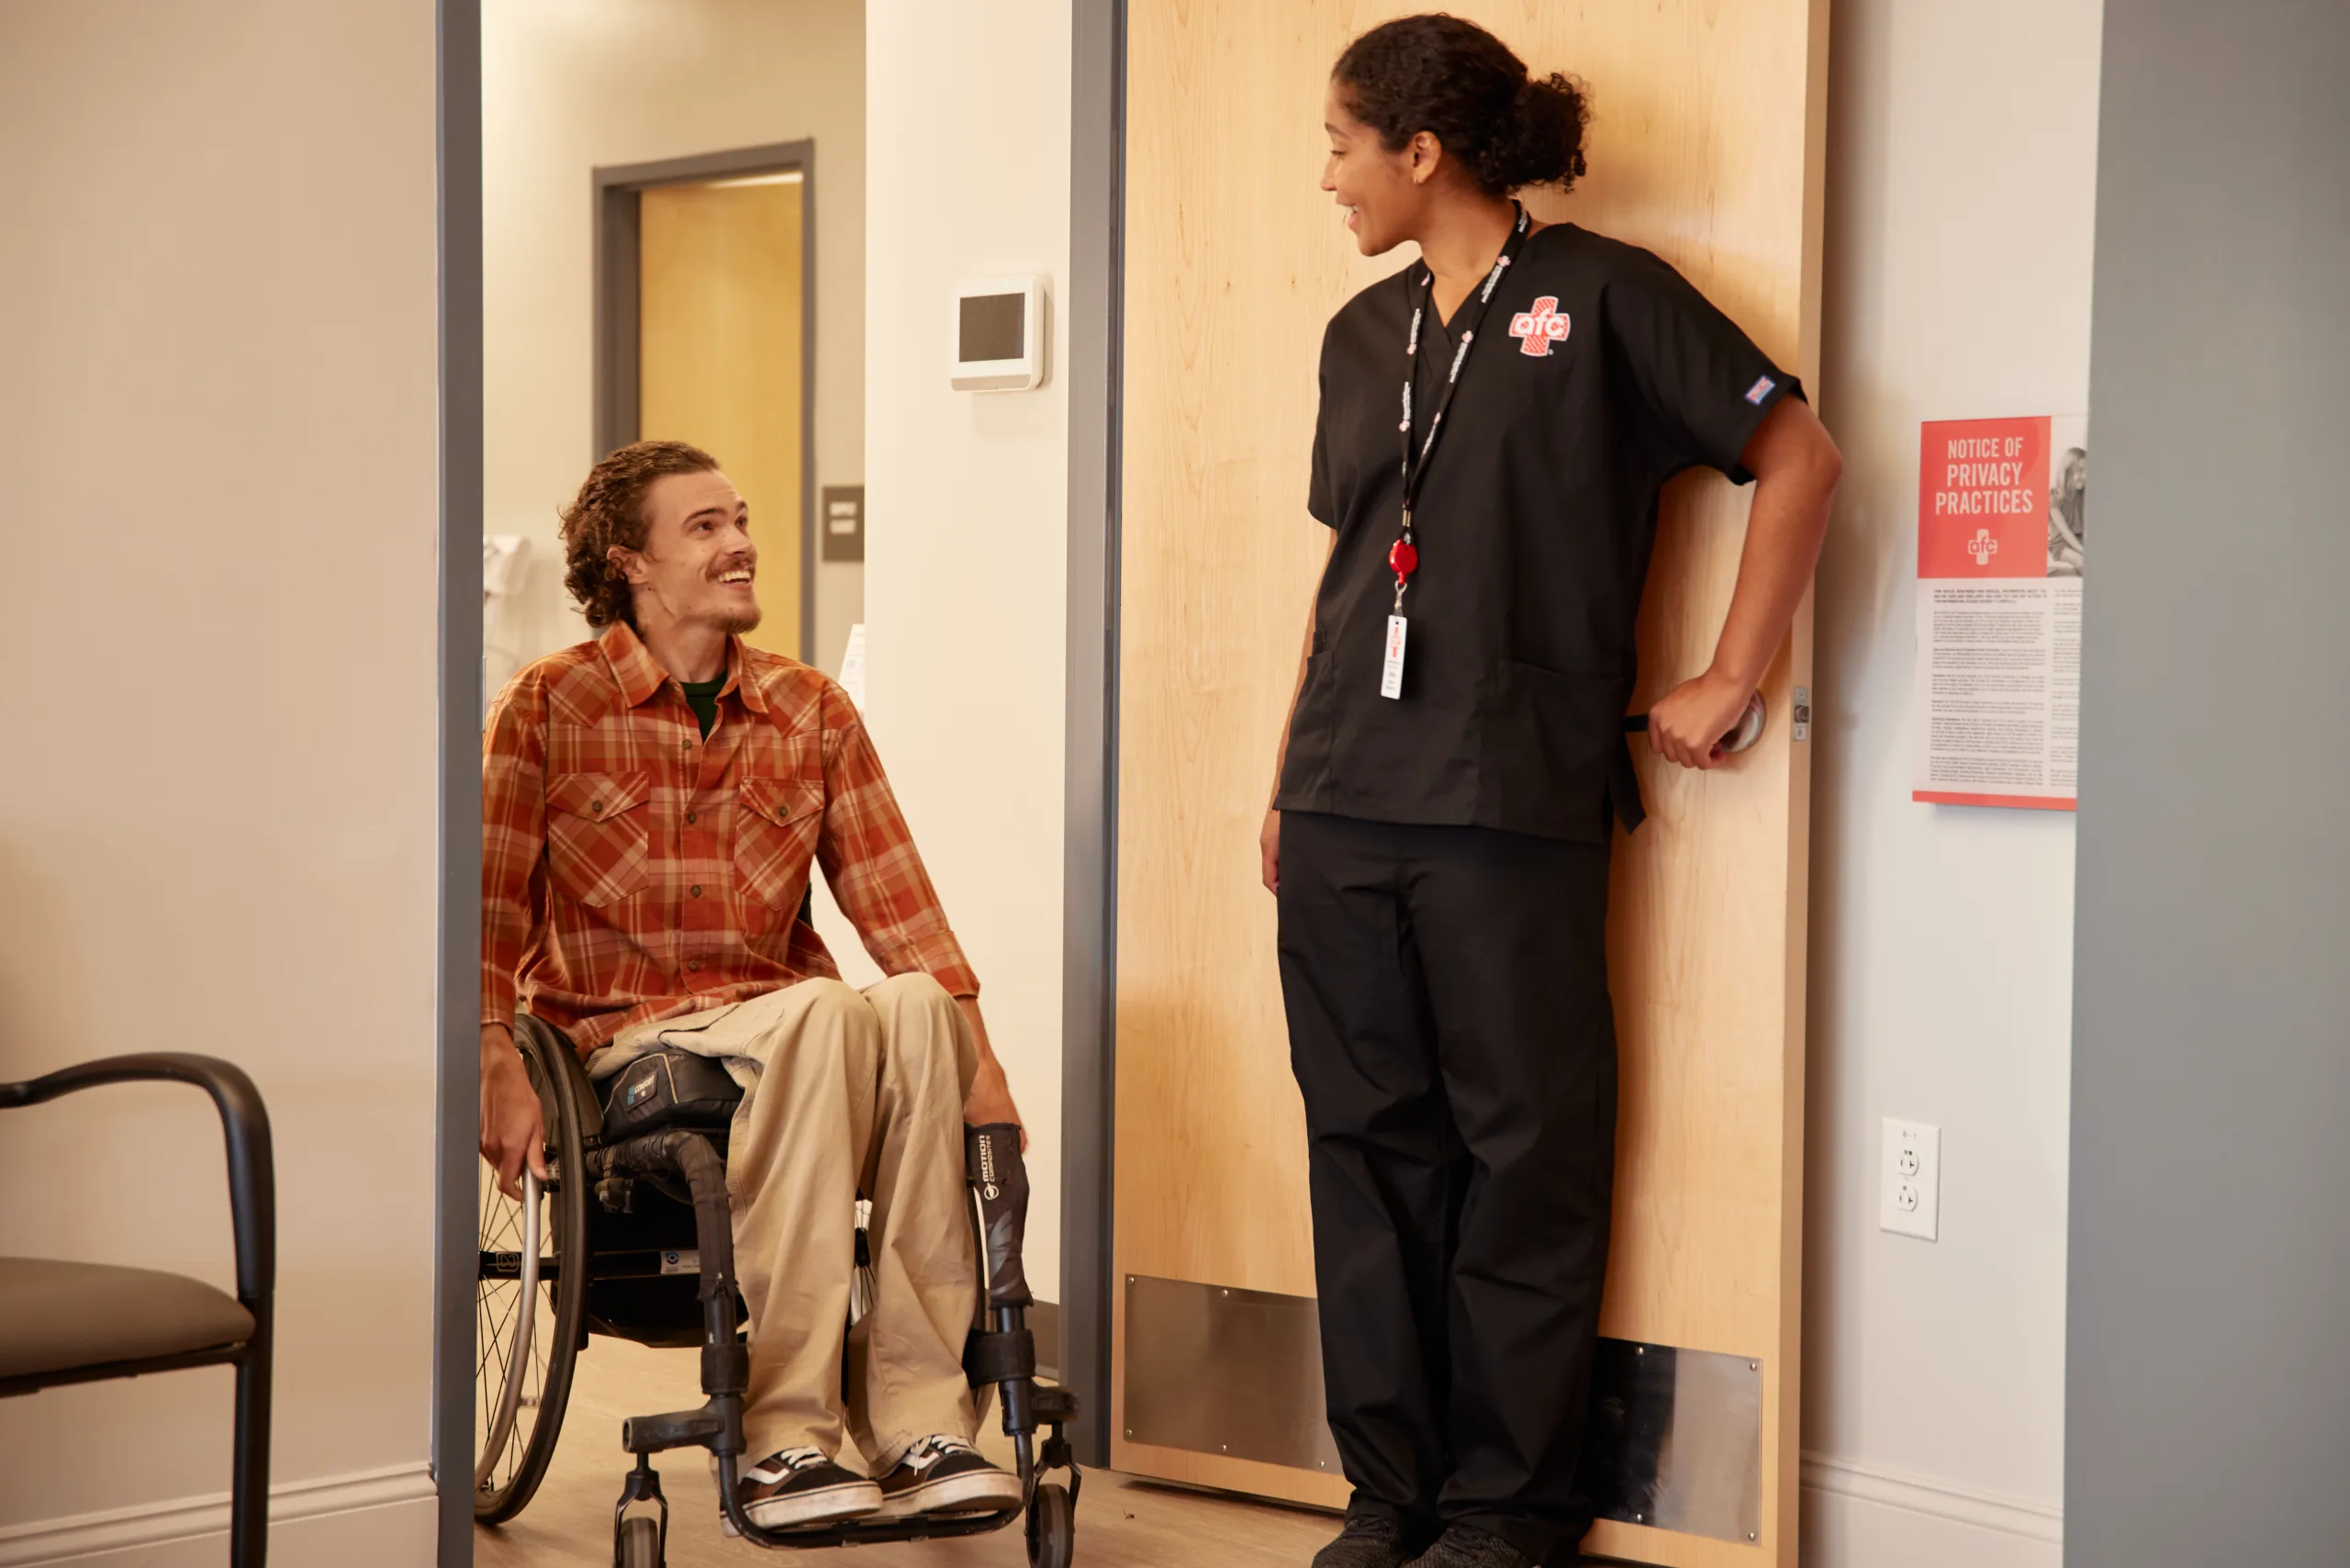 A man in a wheelchair wearing a plaid shirt and beige pants is smiling and conversing with a healthcare worker. The healthcare worker, dressed in black scrubs with a lanyard and ID badge, is standing in the doorway, smiling back at the man. A notice of privacy practices is visible on the wall beside them. The setting appears to be a medical facility or clinic.